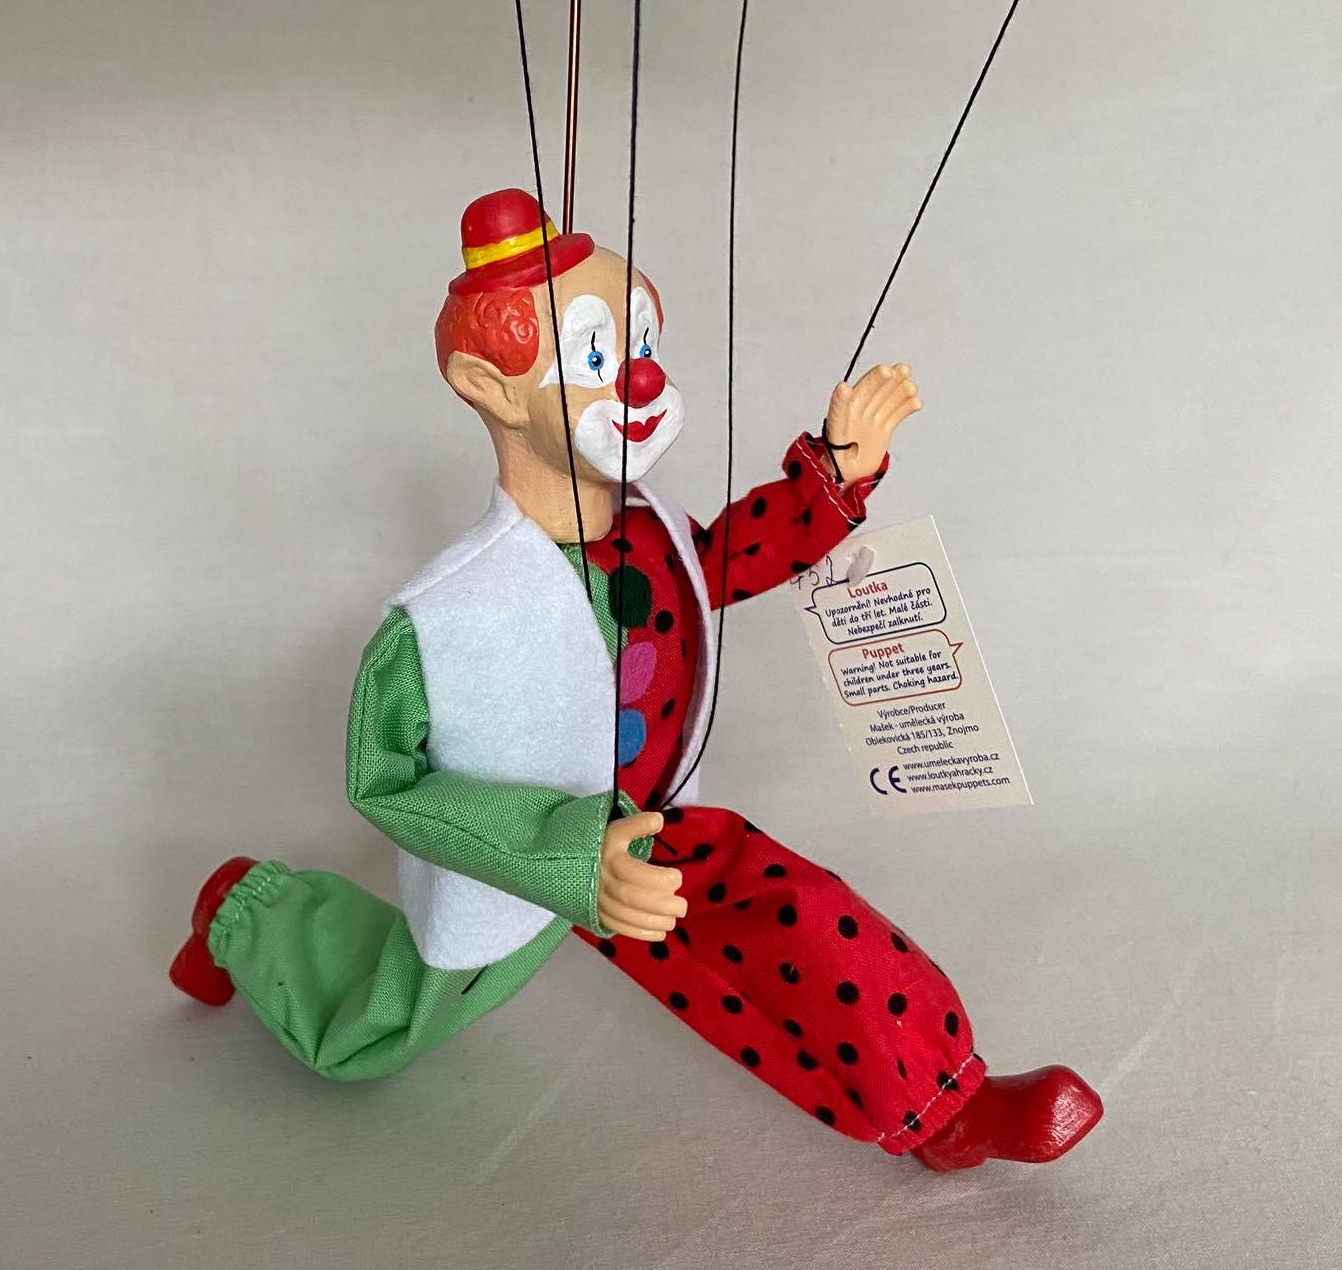 Happy Clown Little Kids Hand Puppet Made Just For Tiny Hands!